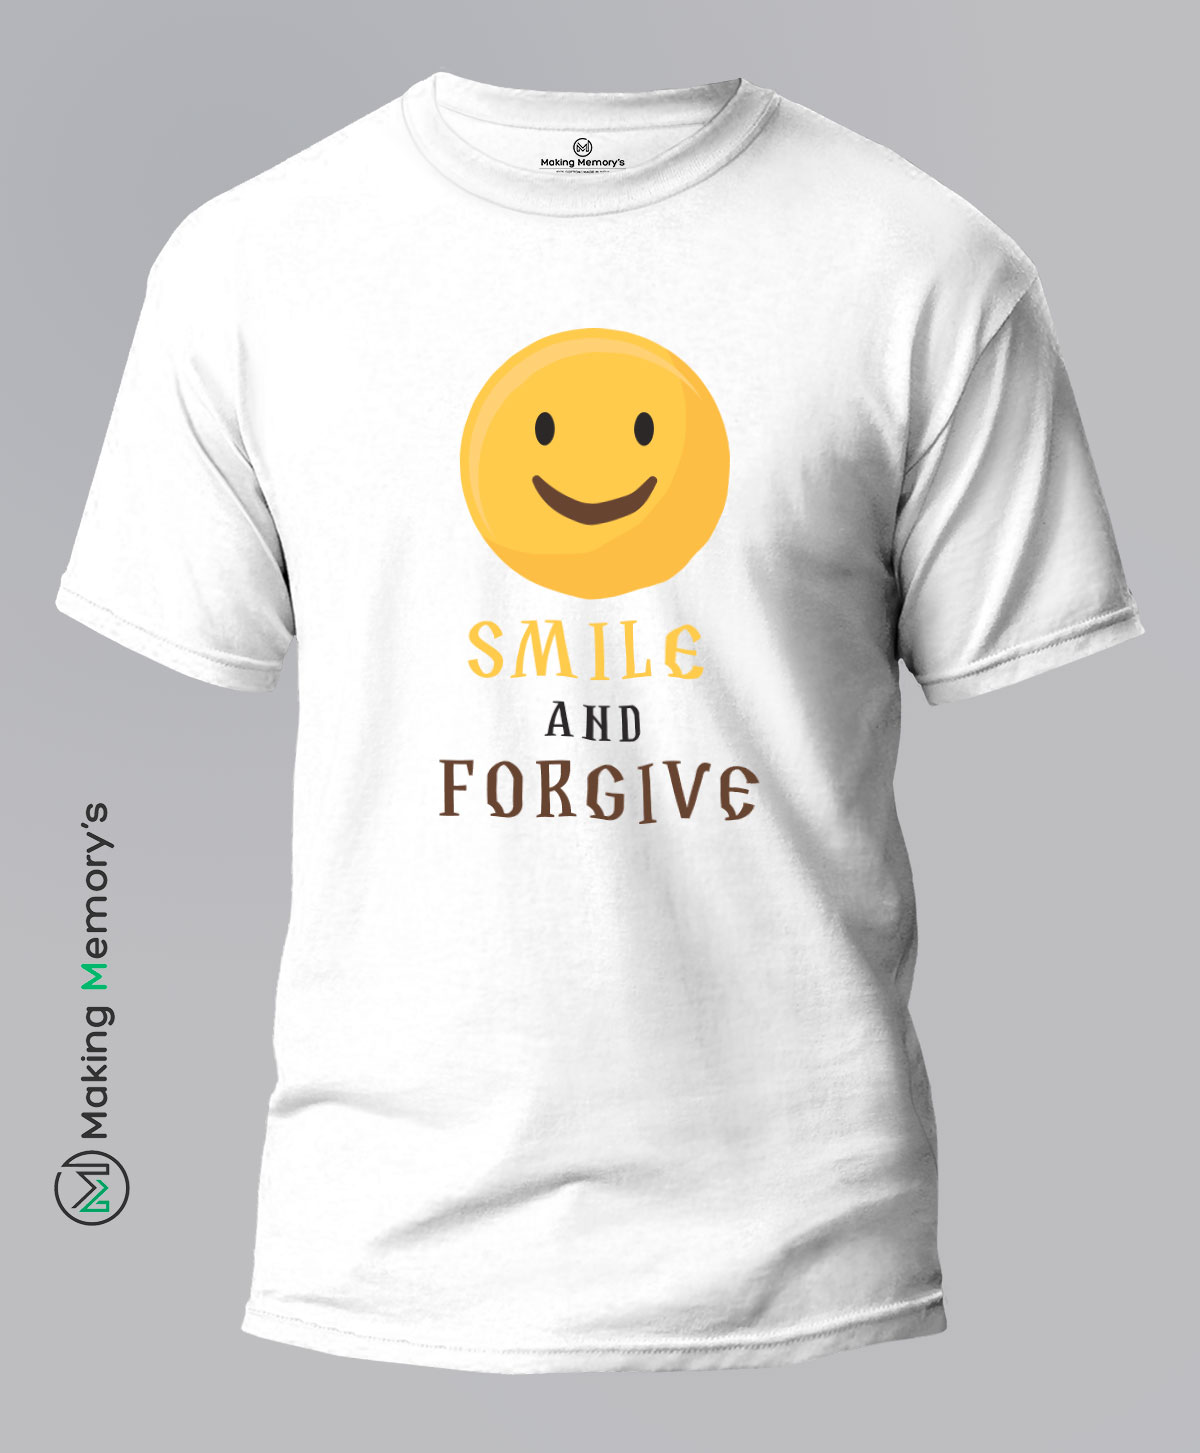 Smile-and-Forgive-White-T-Shirt